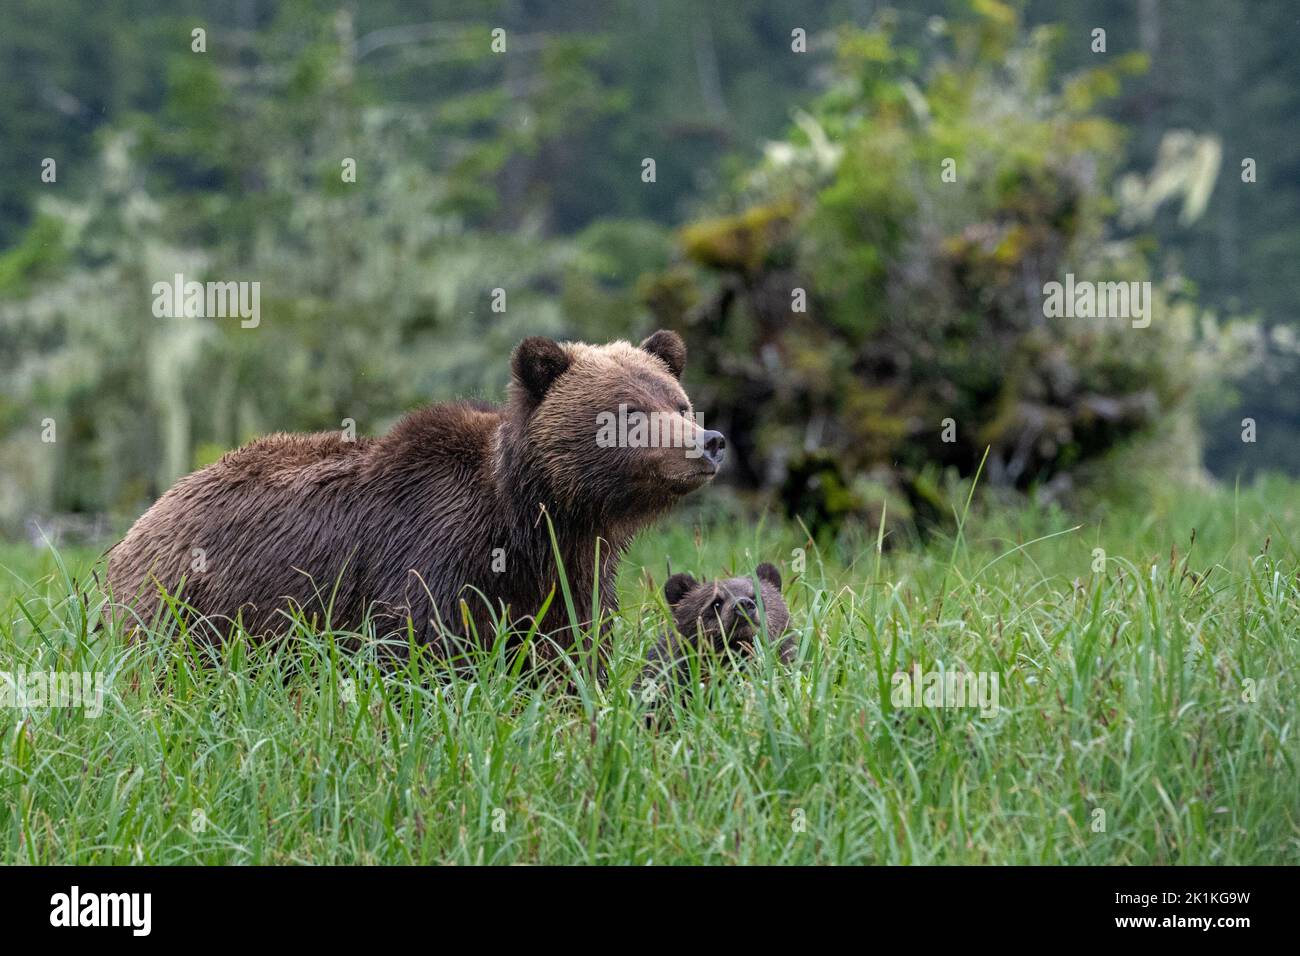 A grizzly bear cub struggles to see over the tall sedge grass as it keeps up with its mother in British Columbia's Great Bear Rainforest. Stock Photo